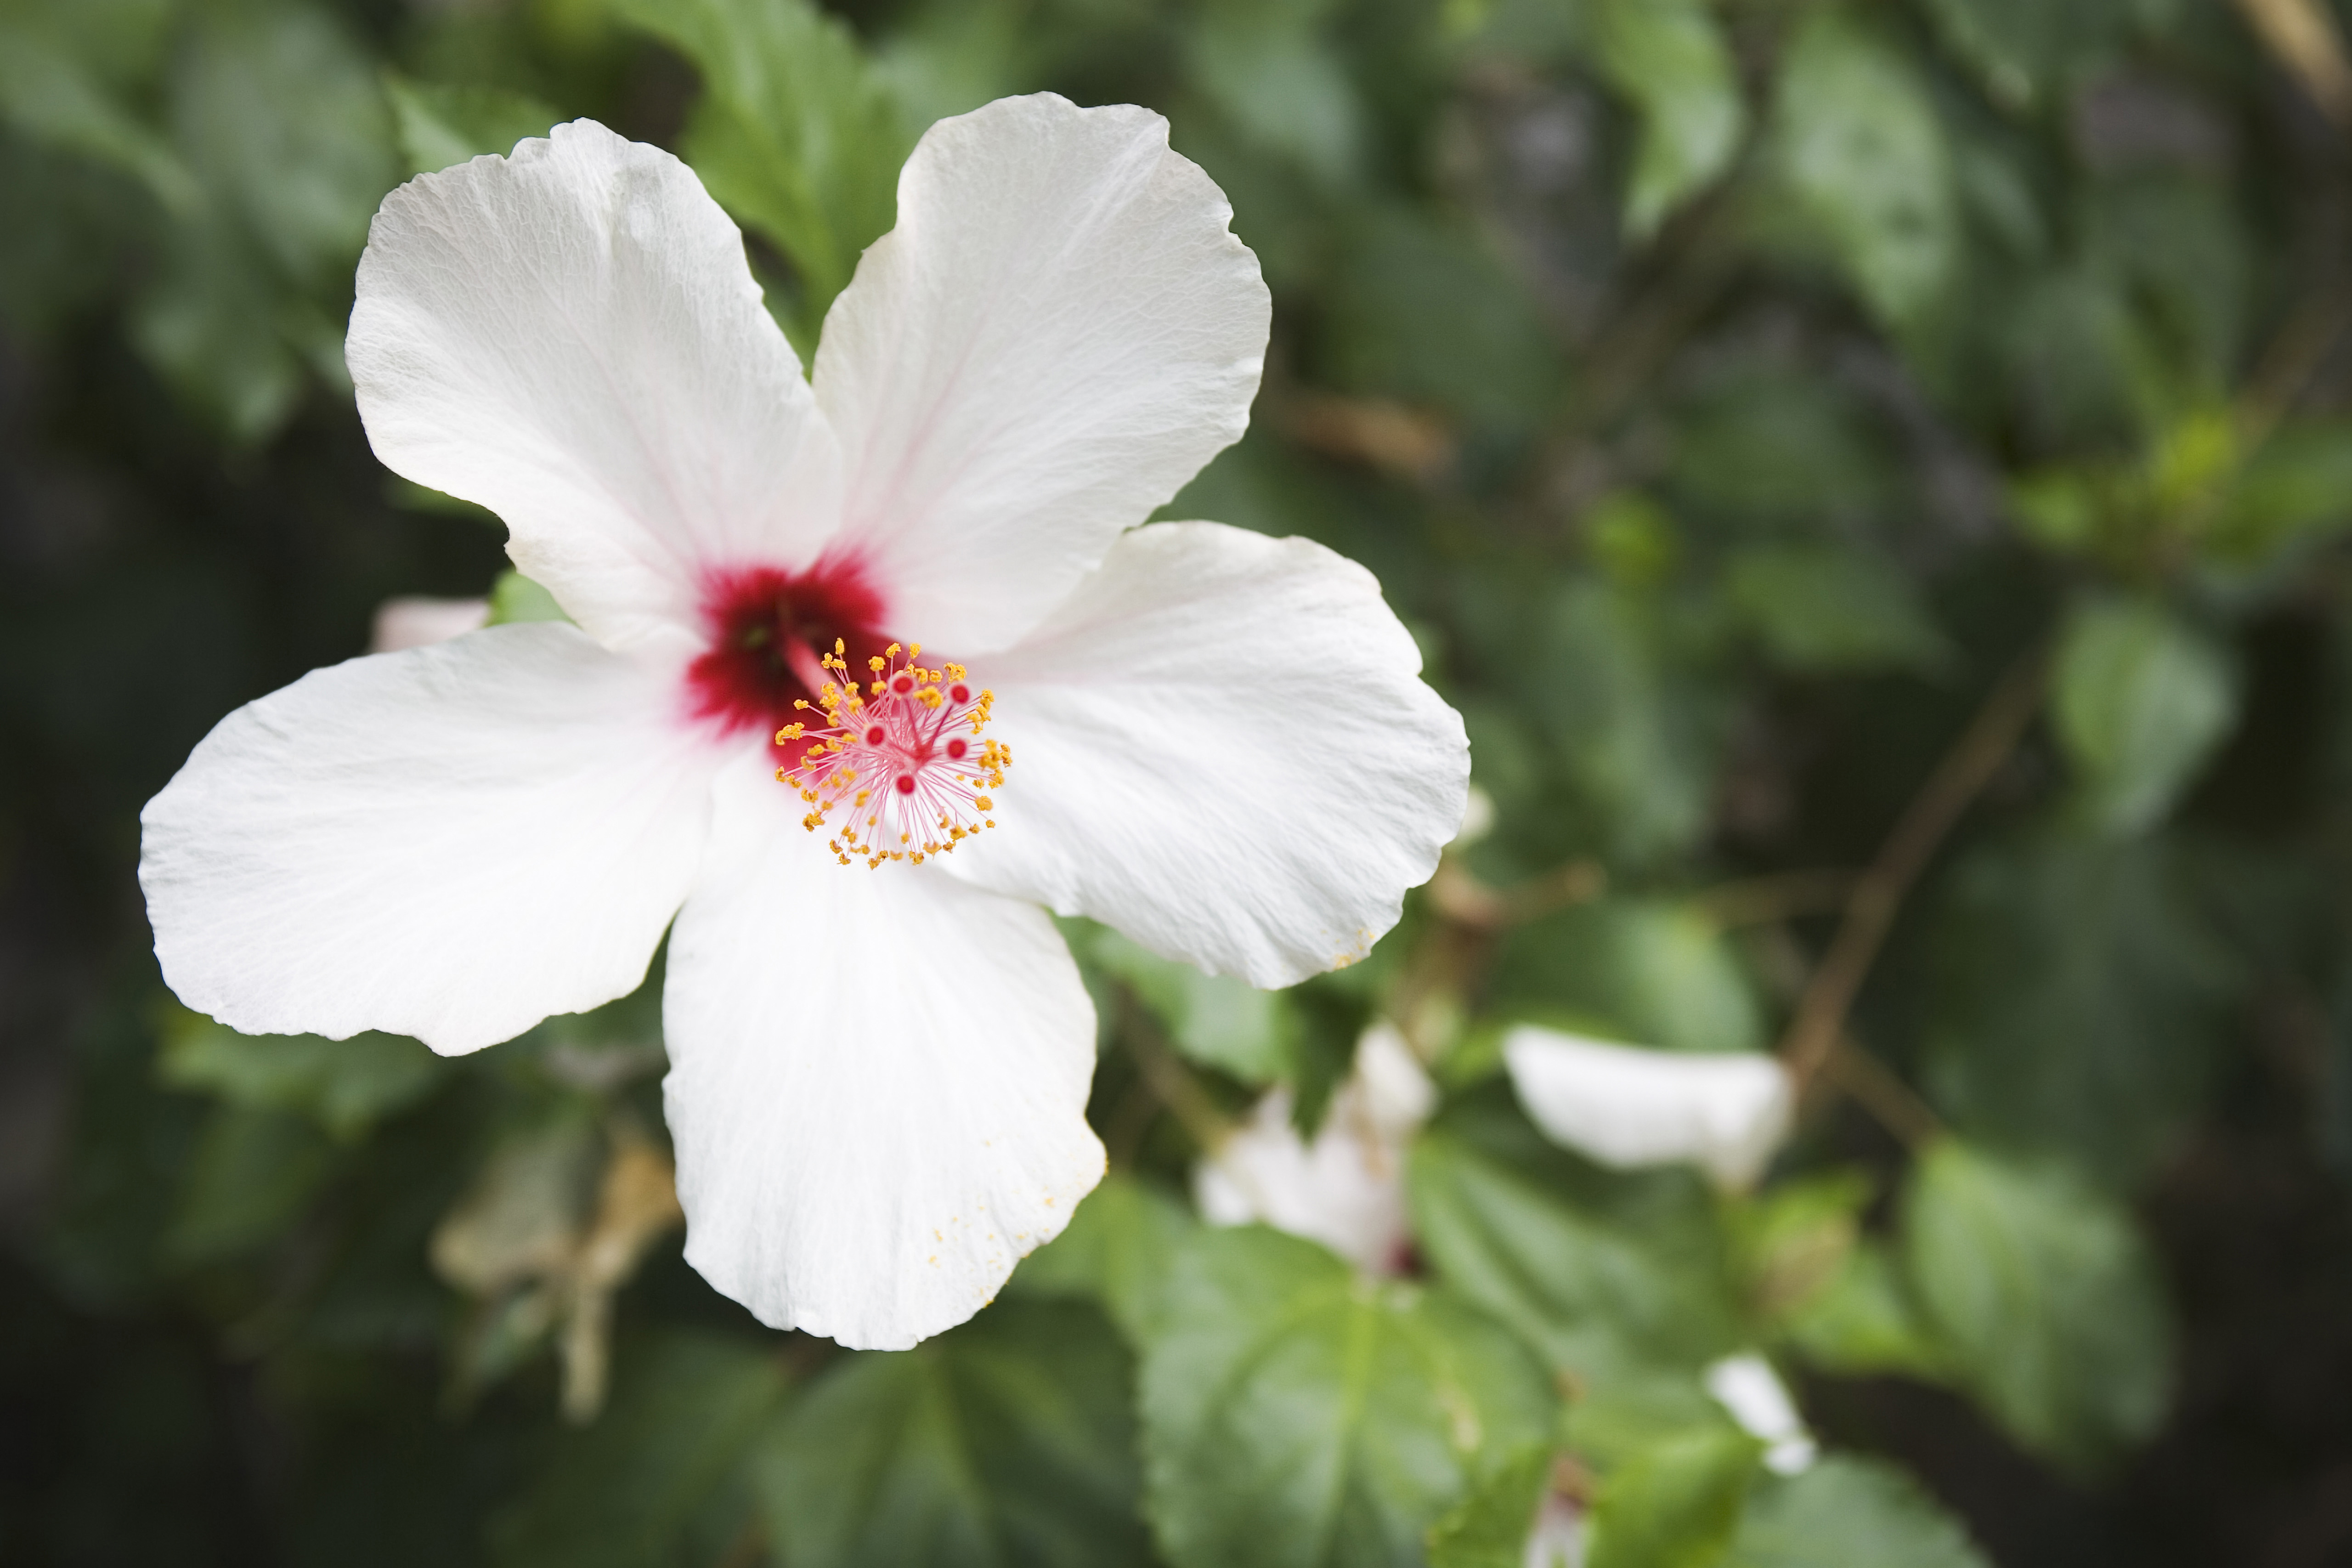 Kaua‘i’s gardens contain plantlife that are native to the islands, like this white hibiscus. Image by Marc Moritsch / National Geographic / Getty